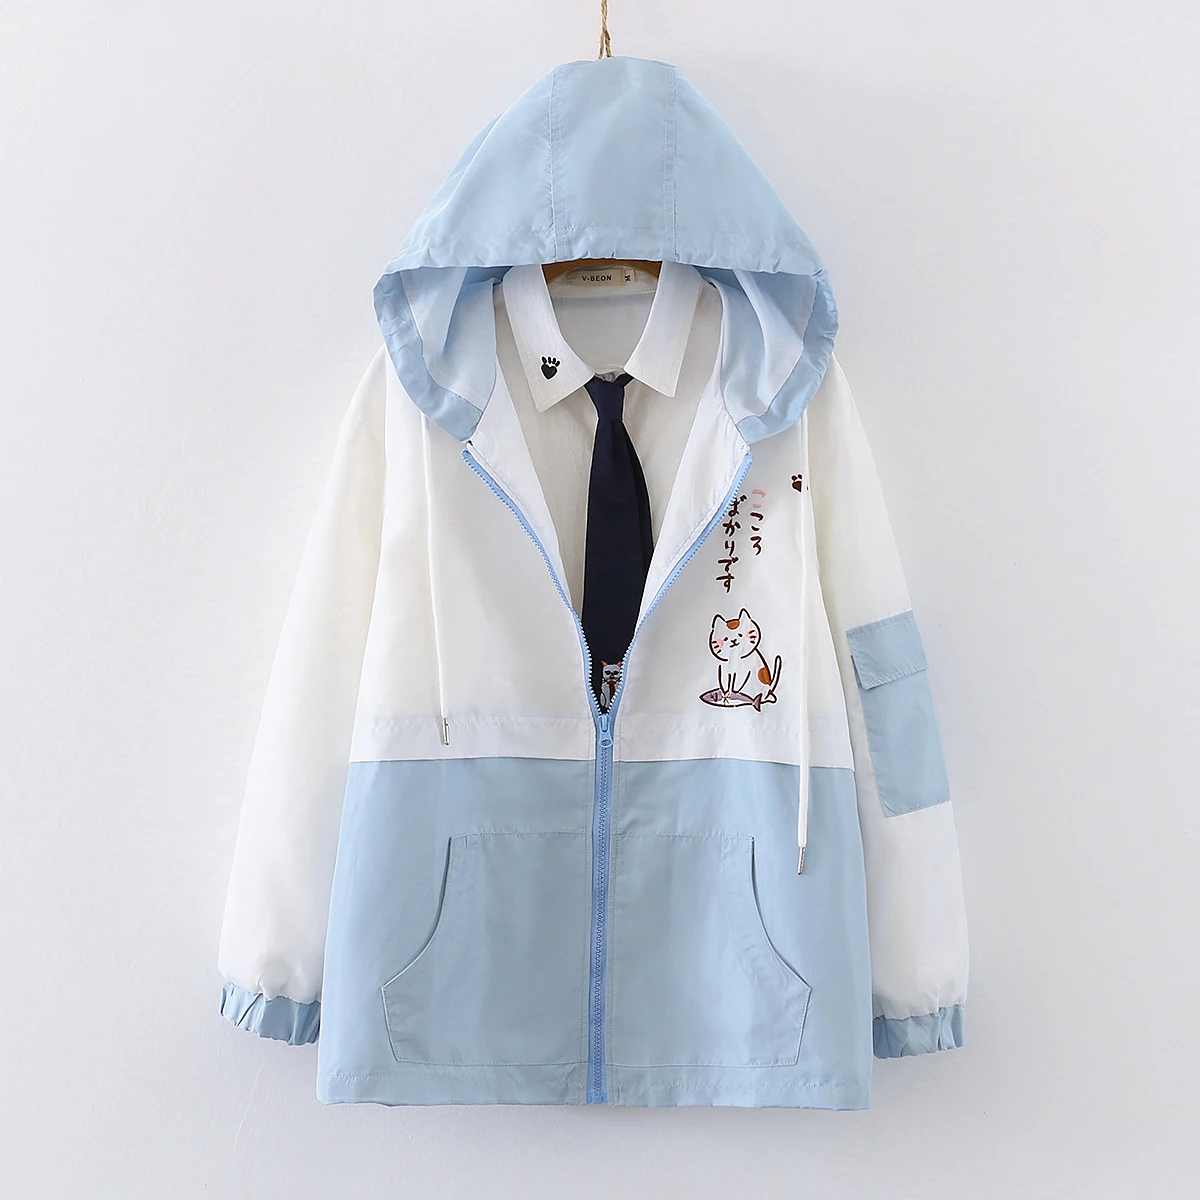 Himifashion Girls Jacket Cute Cats Embroidery Button Down Spring Autumn Short Thin Top Coat 